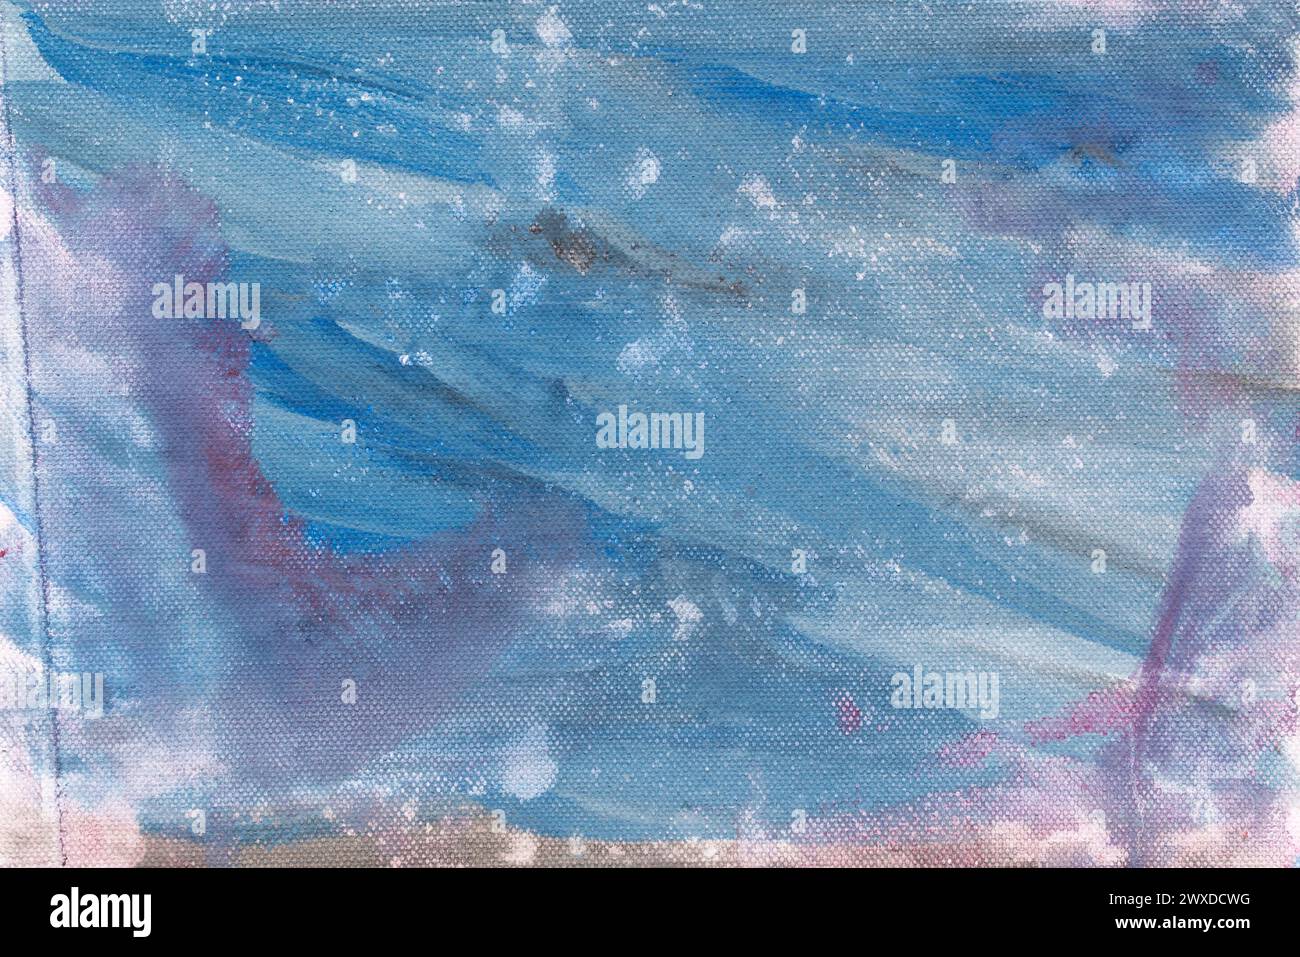 multicolored watercolor painted background on paper texture Stock Photo